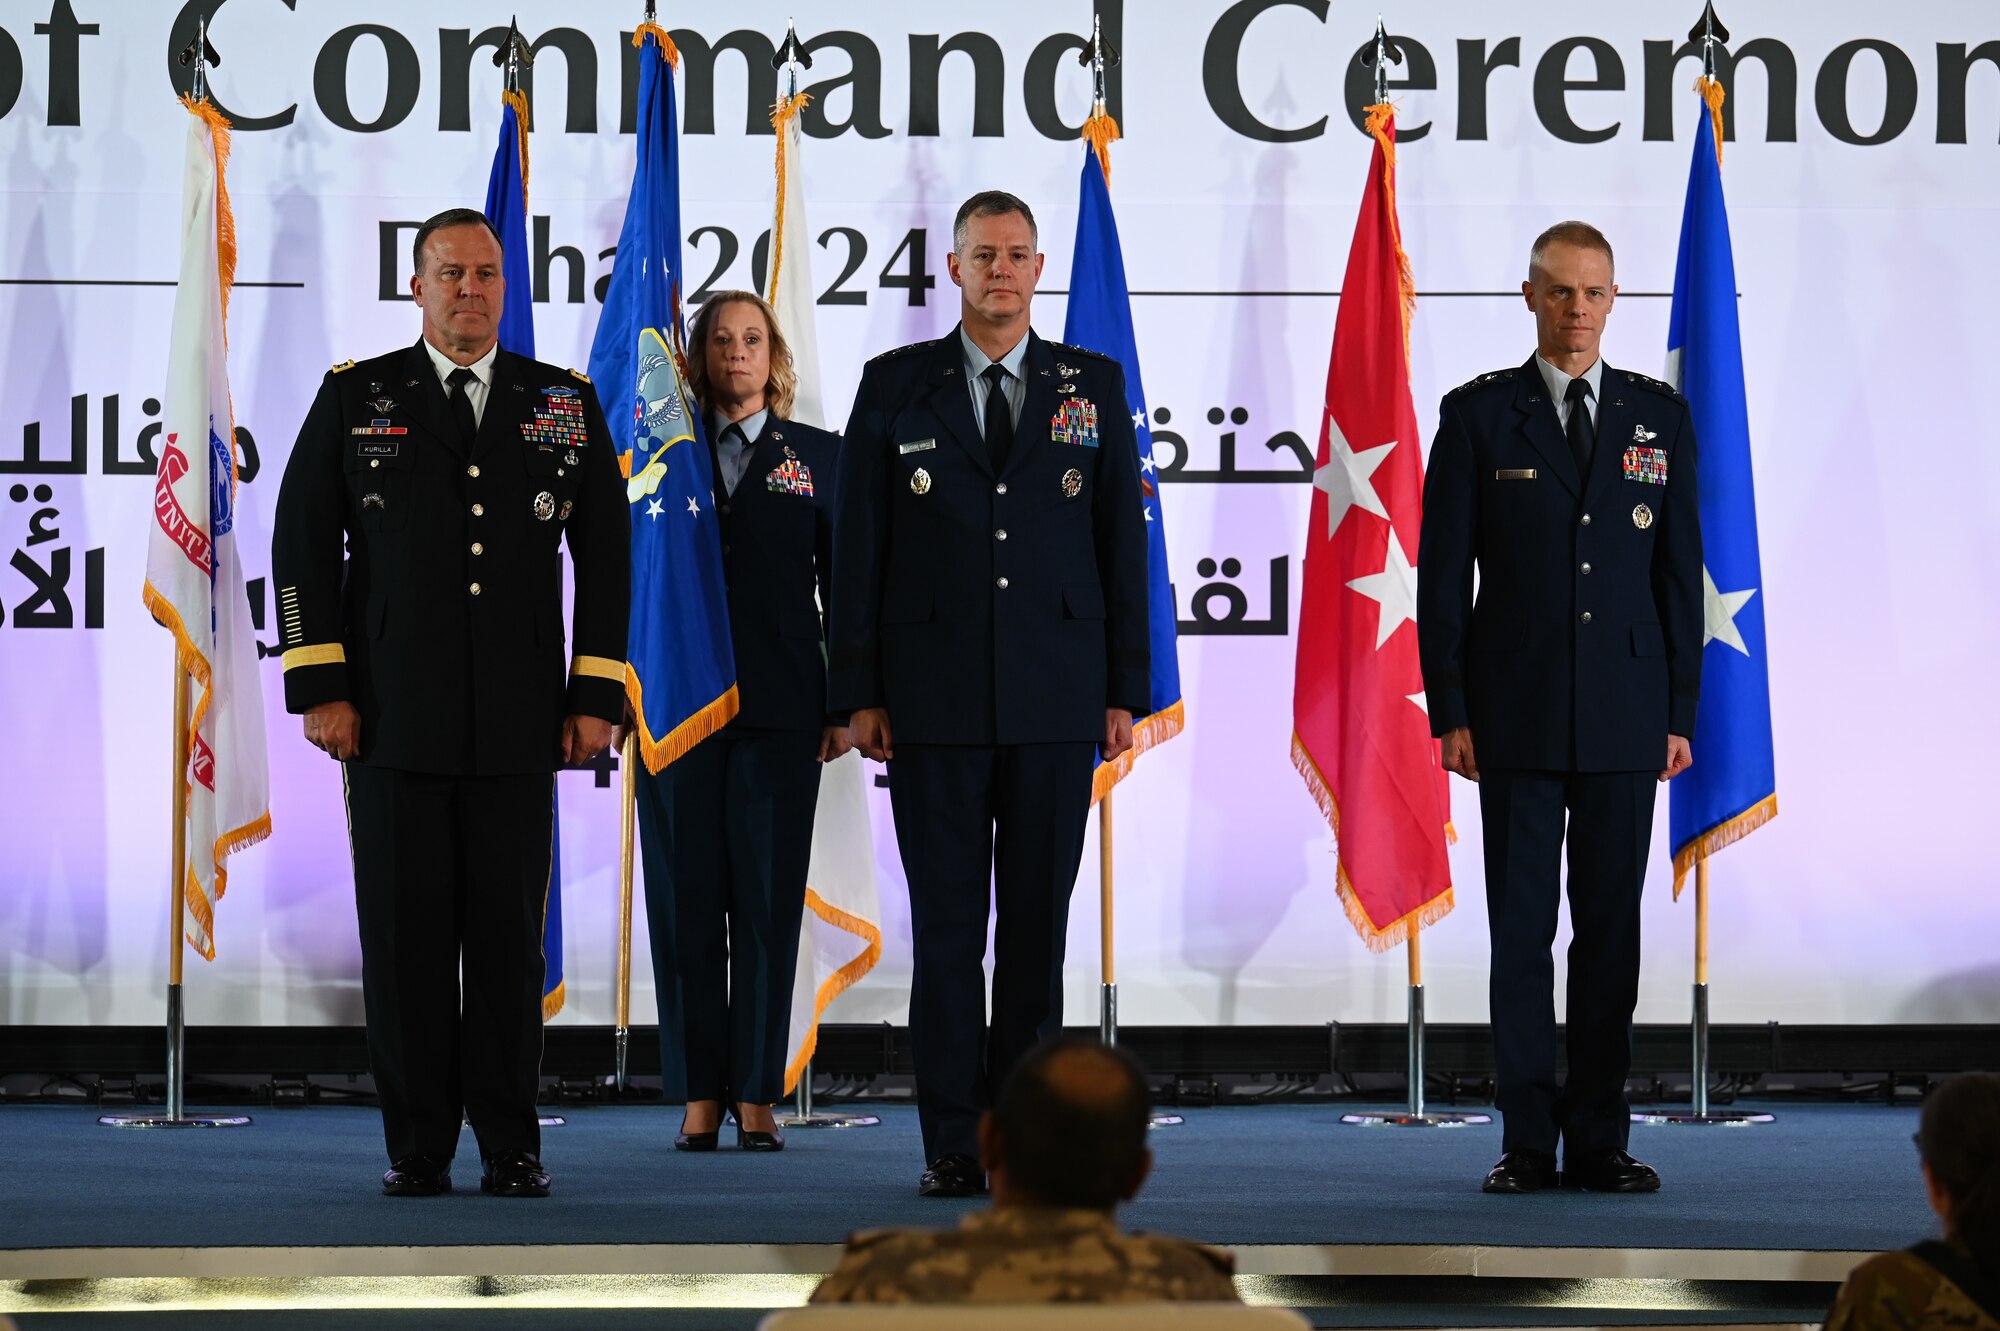 U.S. Army Gen. Michael E. Kurilla (left), U.S. Central Command commander, U.S. Air Force Lt. Gen. Alex Grynkewich (center), outgoing U.S. Air Forces Central commander, and U.S. Air Force Lt. Gen. Derek France, new commander of Ninth Air Force (Air Forces Central), stand at attention during a change of command ceremony at Al Udeid Air Base, Qatar, April 18, 2024. France will serve as the commander of AFCENT and the combined forces air component, working closely with coalition, joint, and interagency partners to lead a combined force that delivers decisive airpower and promotes security throughout the U.S. CENTCOM’s 21-nation area of responsibility. (U.S. Air Force photo)